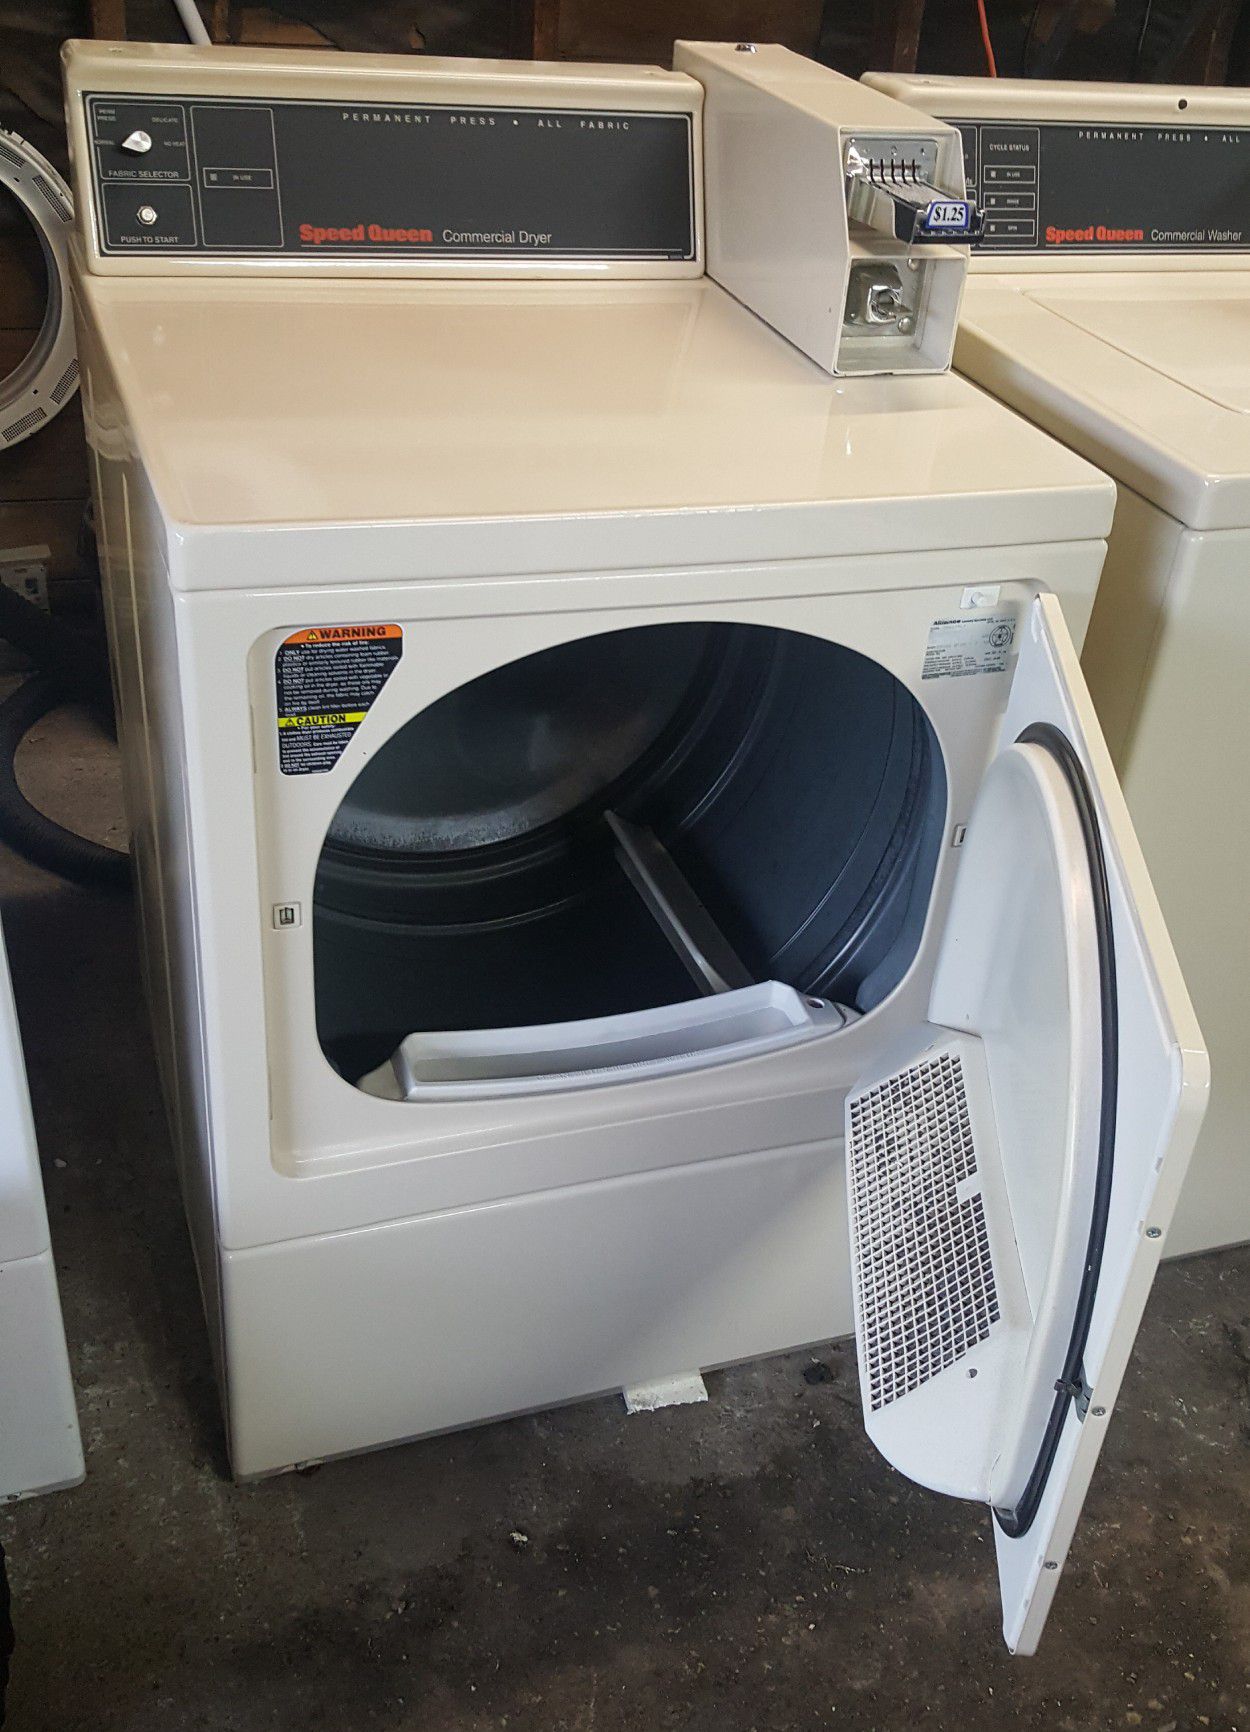 COIN OPERATED SPEED QUEEN WASHER AND DRYER